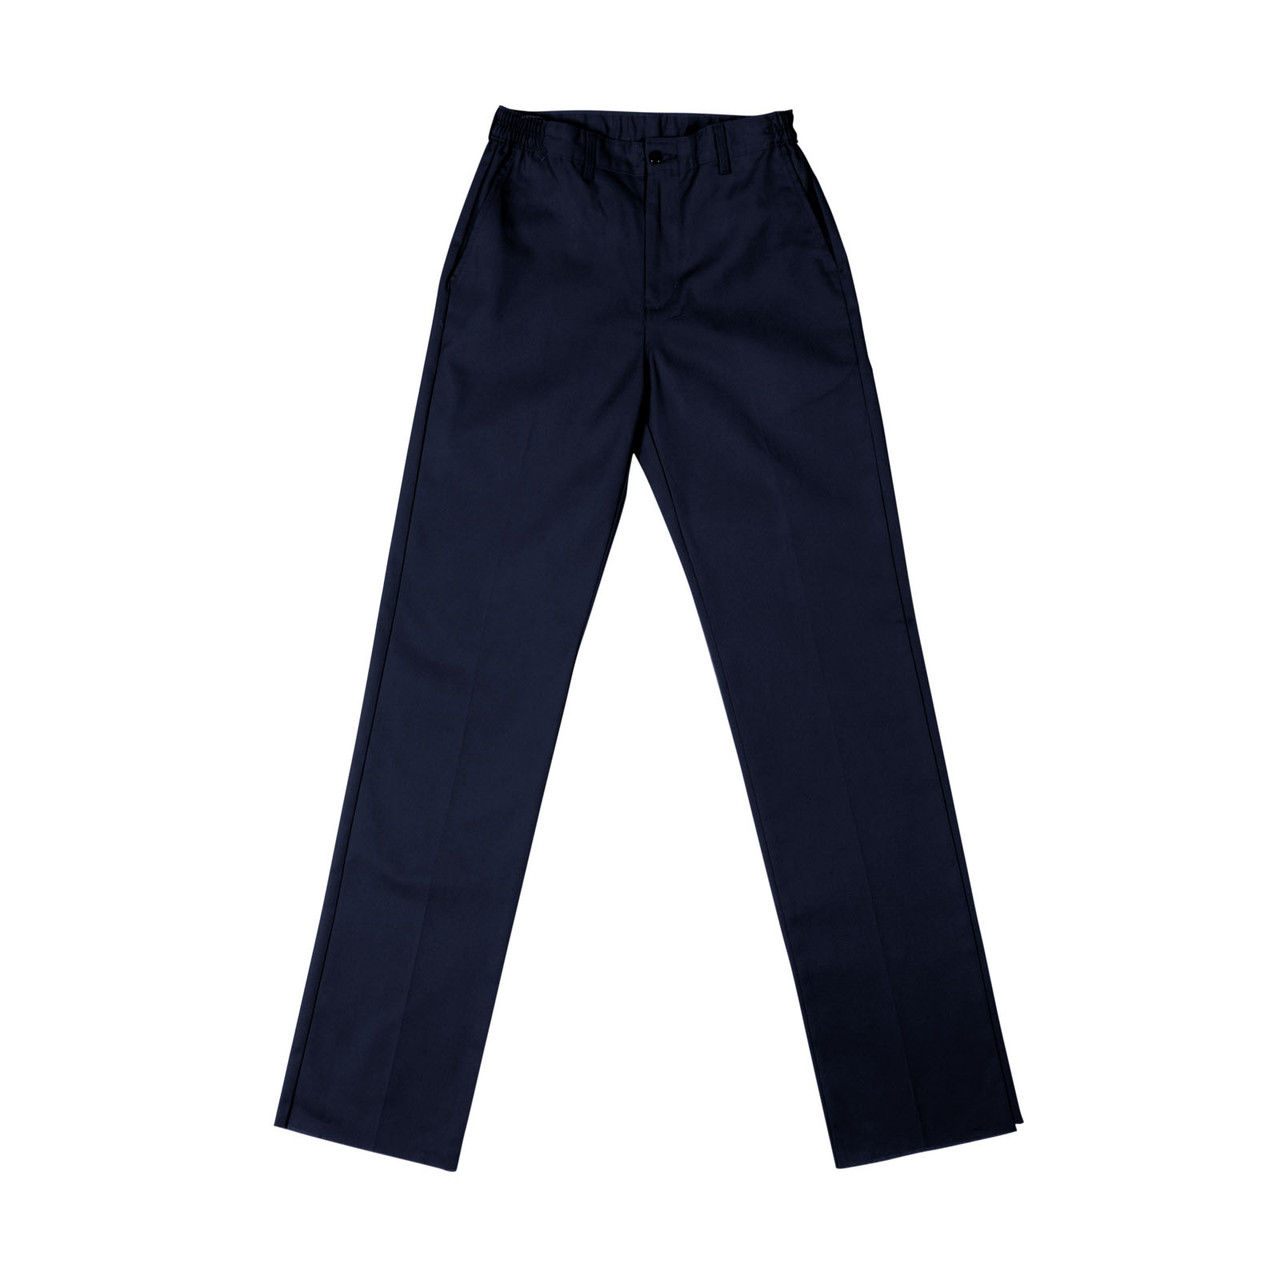 What notable feature does the blue work pants, P26 Women's Flex Waist Industrial, have?